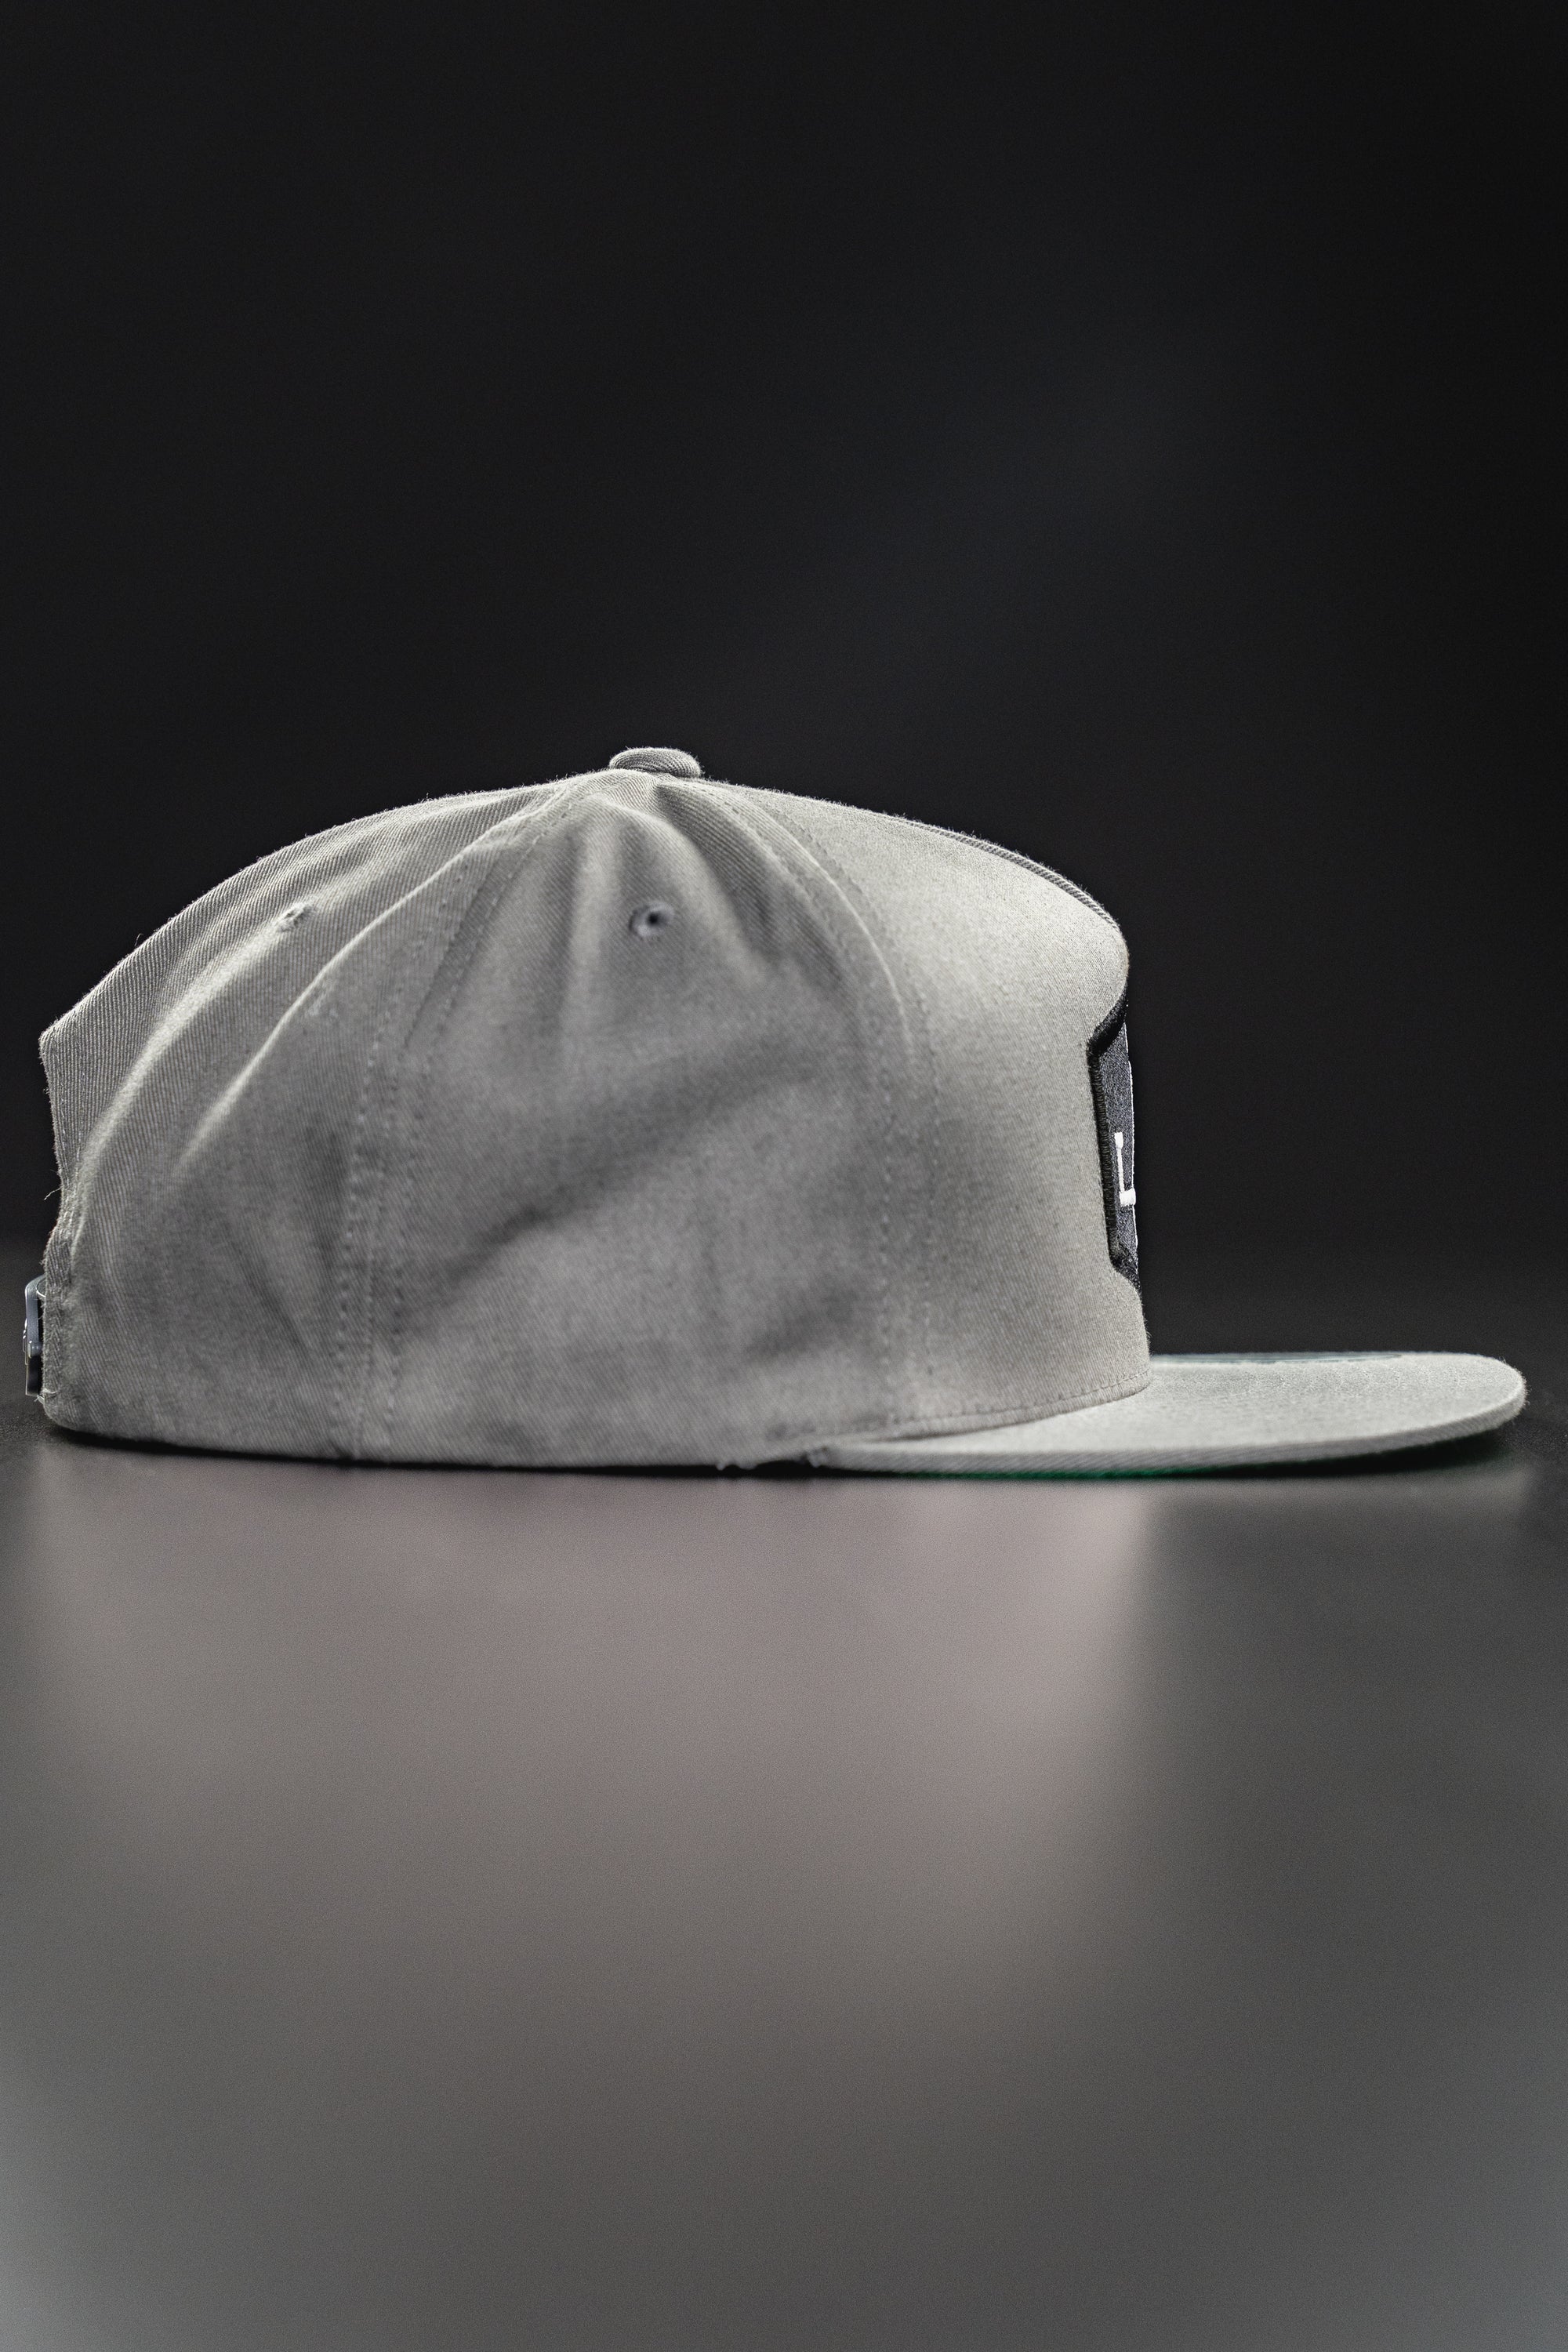 Lions Not Sheep "Element" Hat (Grey) - Lions Not Sheep ®